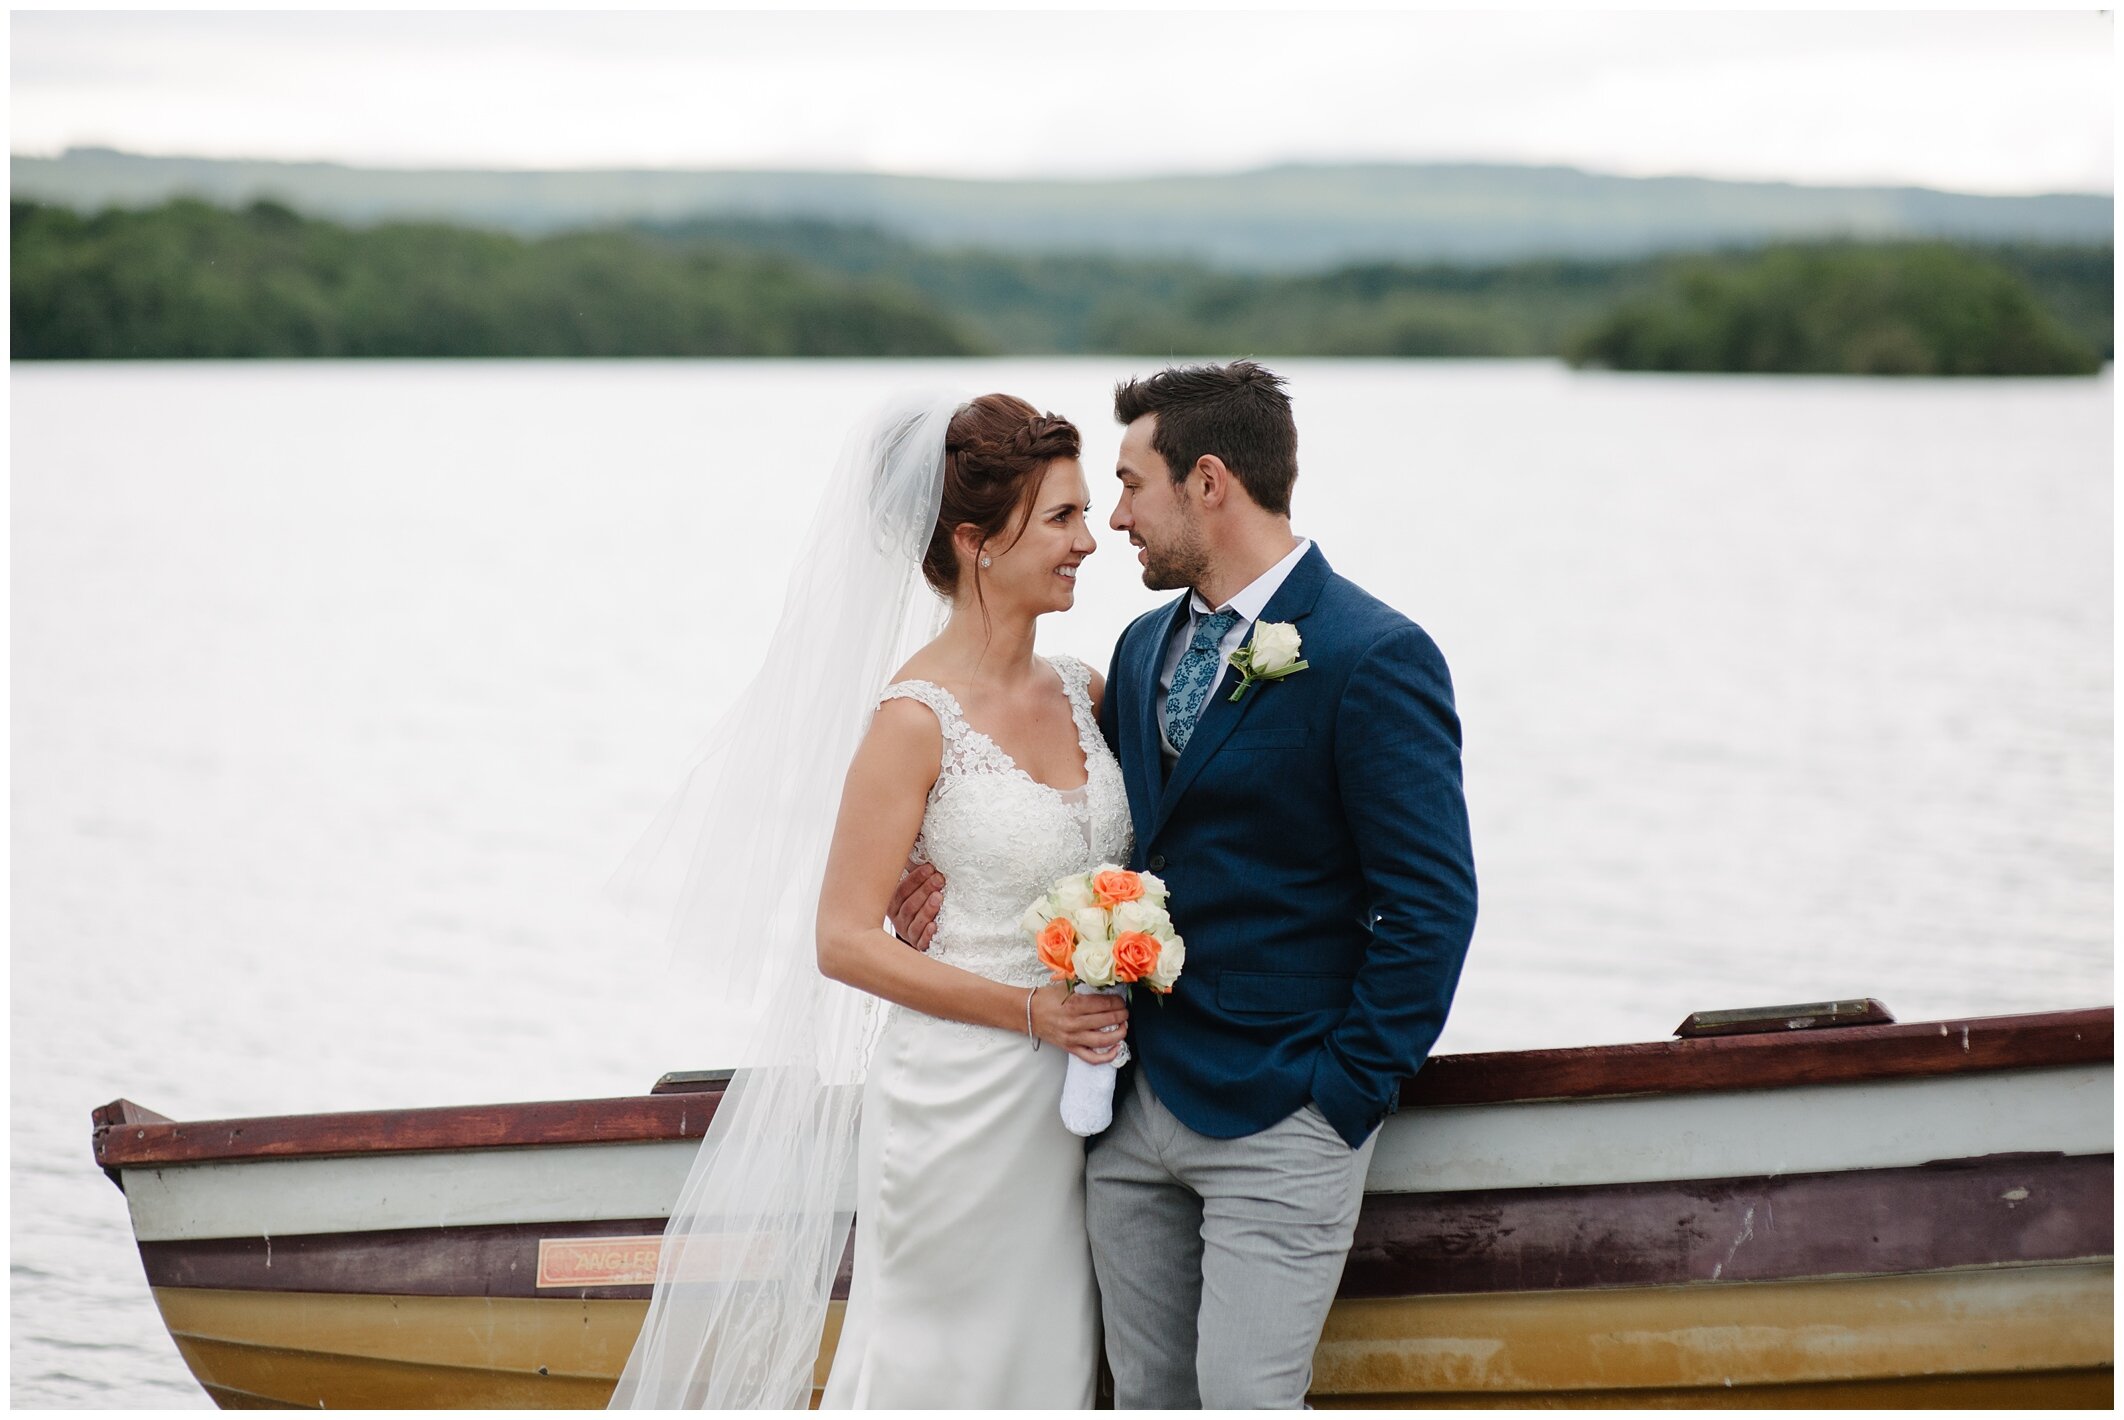 Lynsey_Andy_Rossharbour_Fermanagh_wedding_jude_browne_photography_0098.jpg